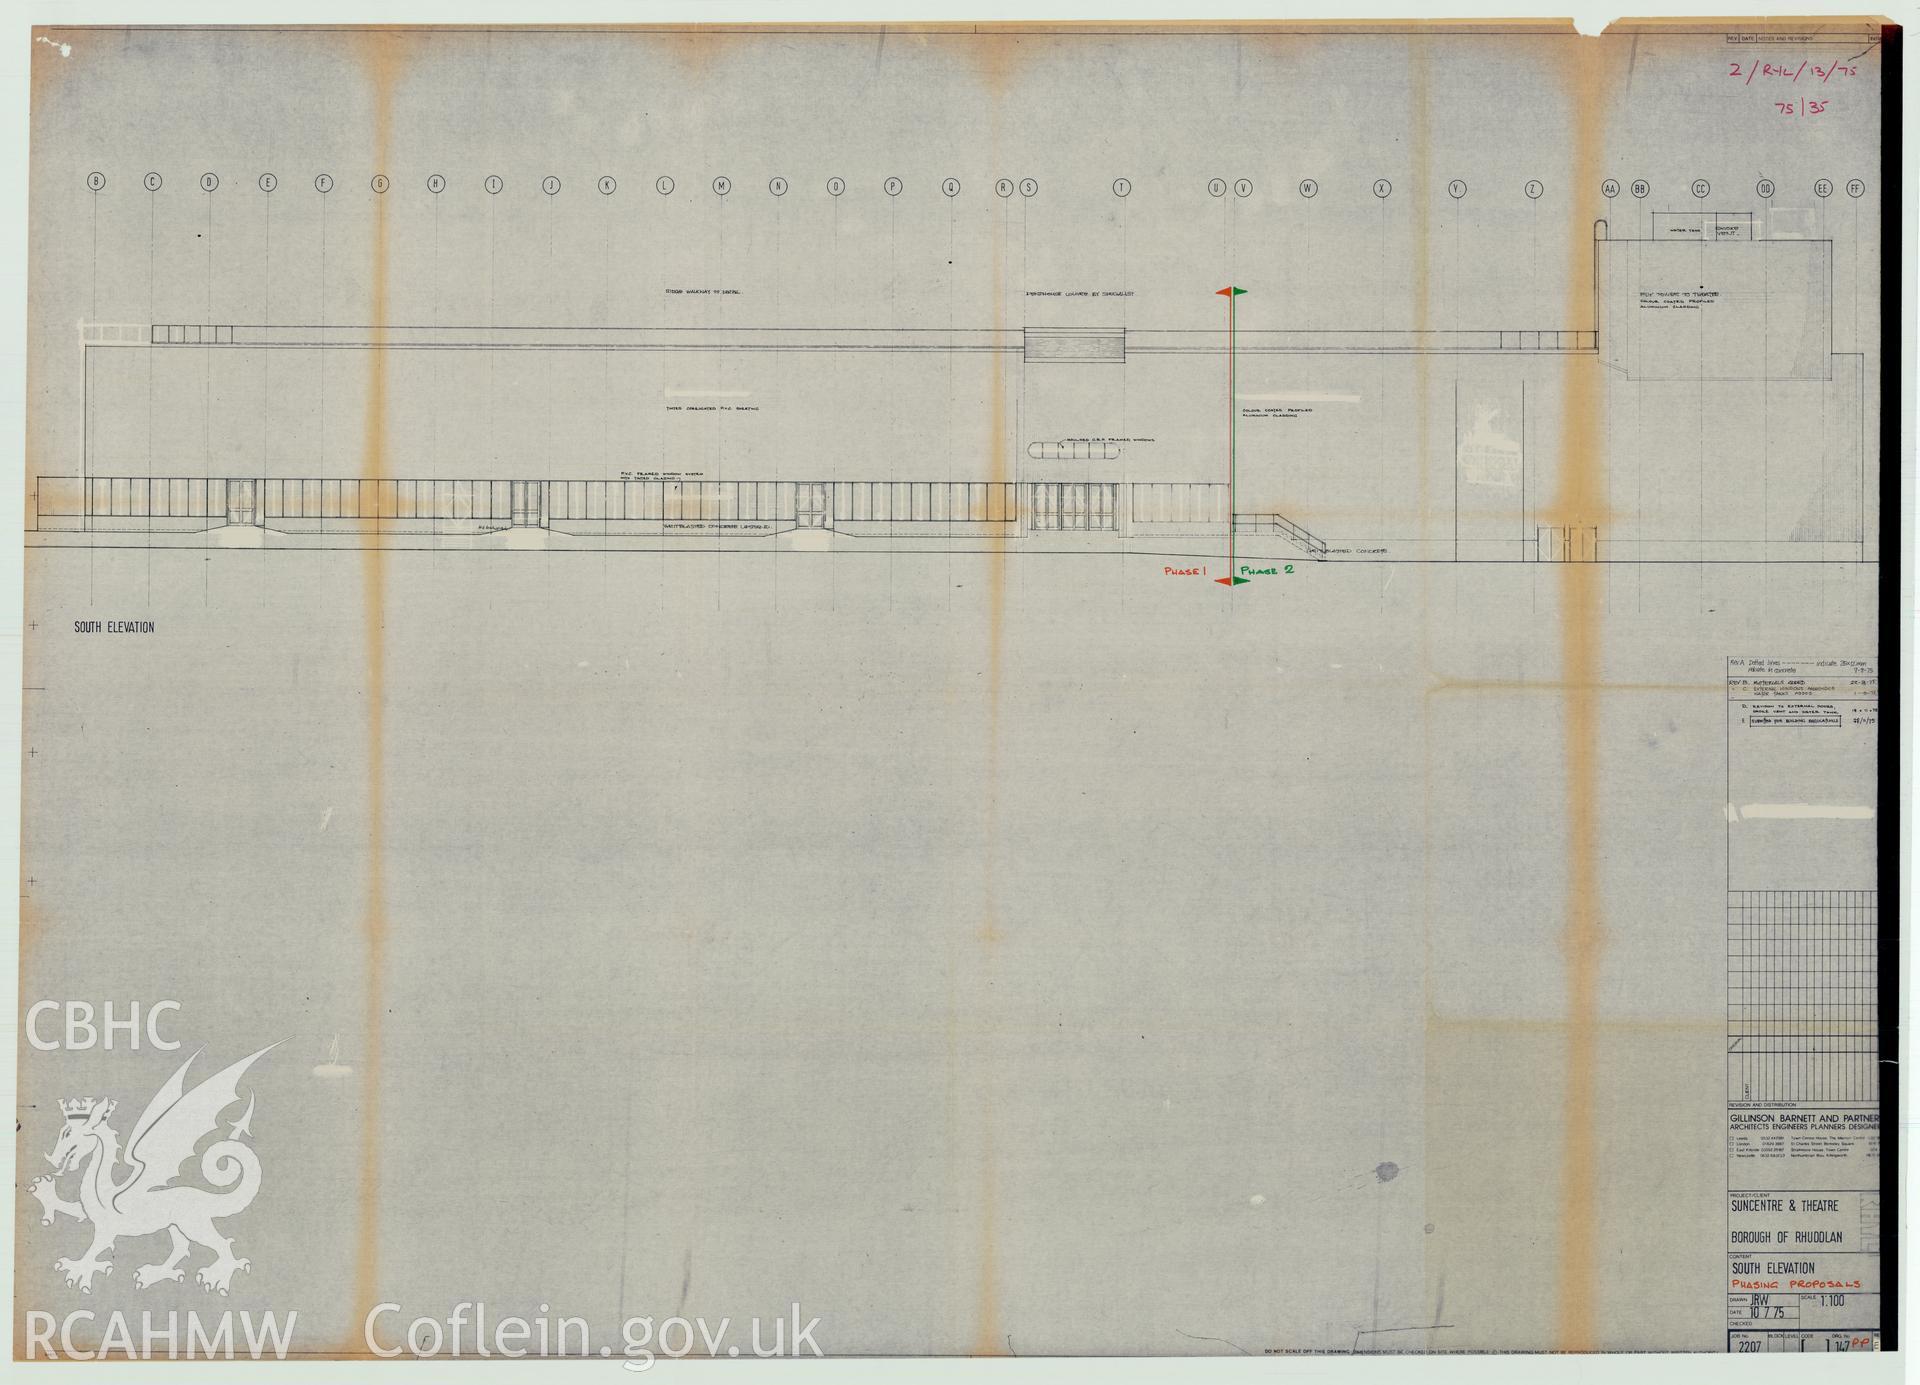 Digital copy of a measured drawing showing south elevation phasing proposals for the Sun Centre, Rhyl, produced by Gillinson Barnett and Partners. Loaned for copying by Denbighshire County Council.